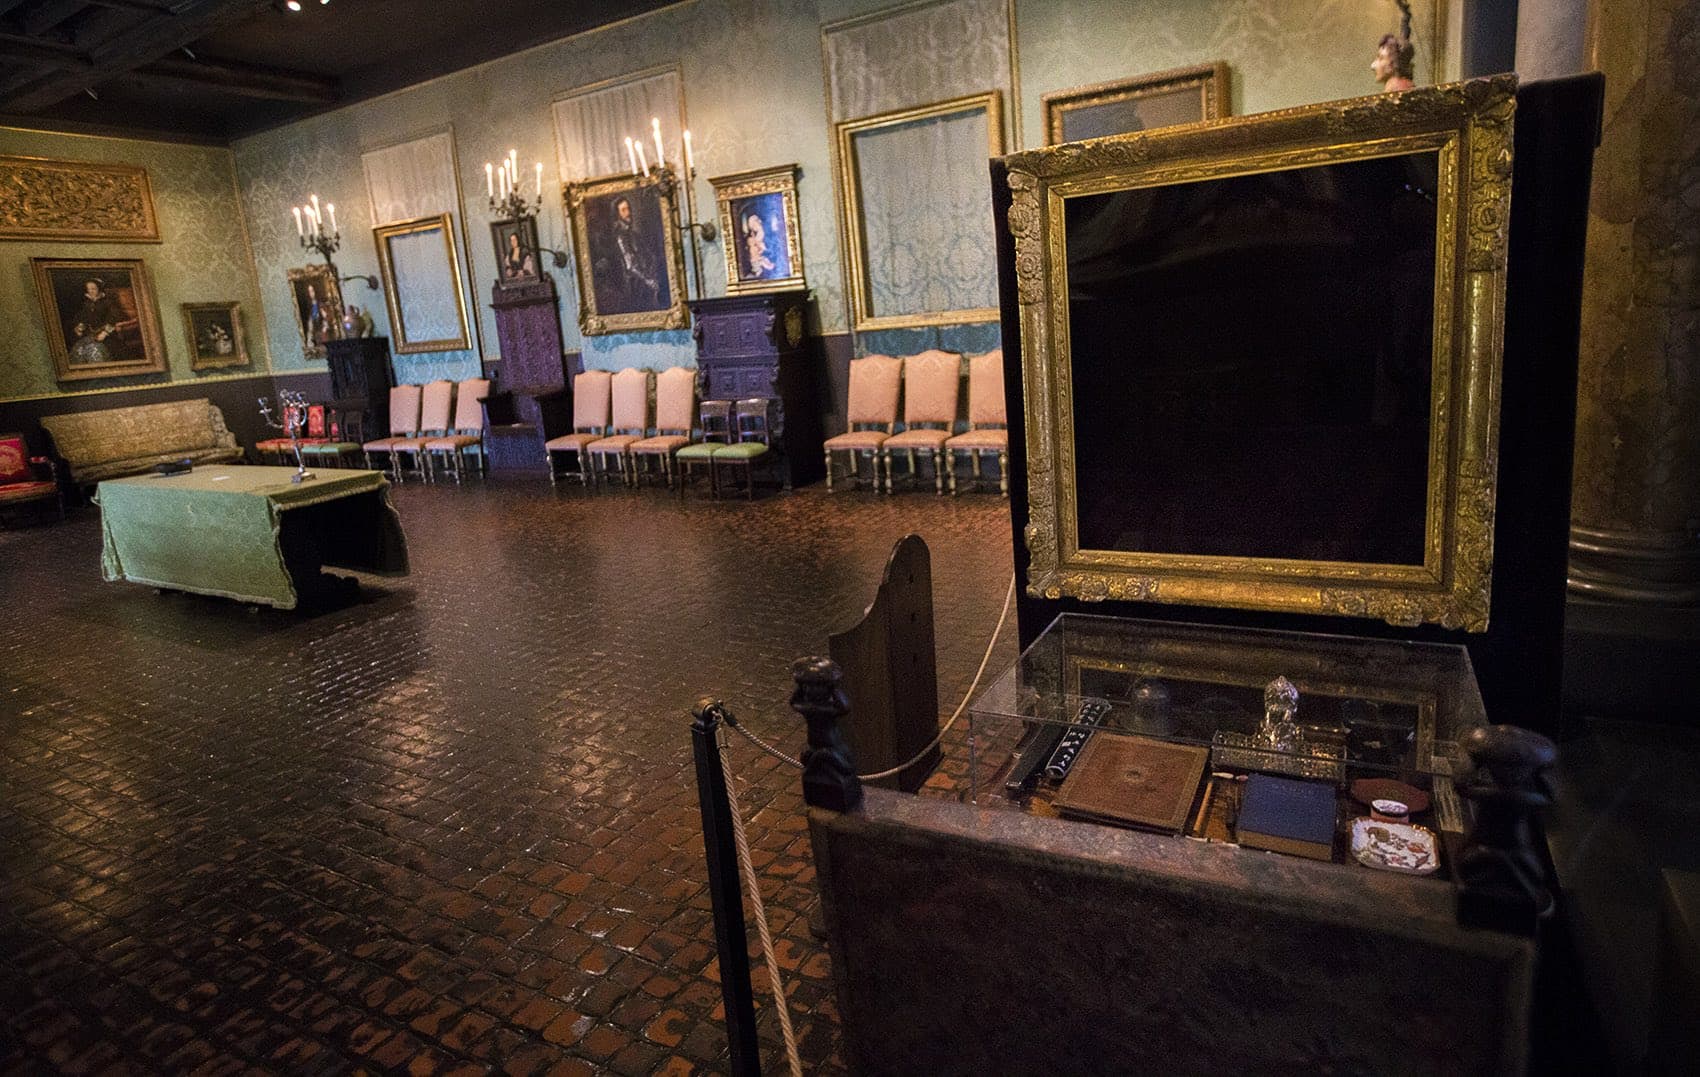 The Isabella Stewart Gardner Museum's Dutch Room, where thieves stole three Rembrandts, a Vermeer, a painting by Govaert Flinck and an ancient Chinese beaker. (Jesse Costa/WBUR)